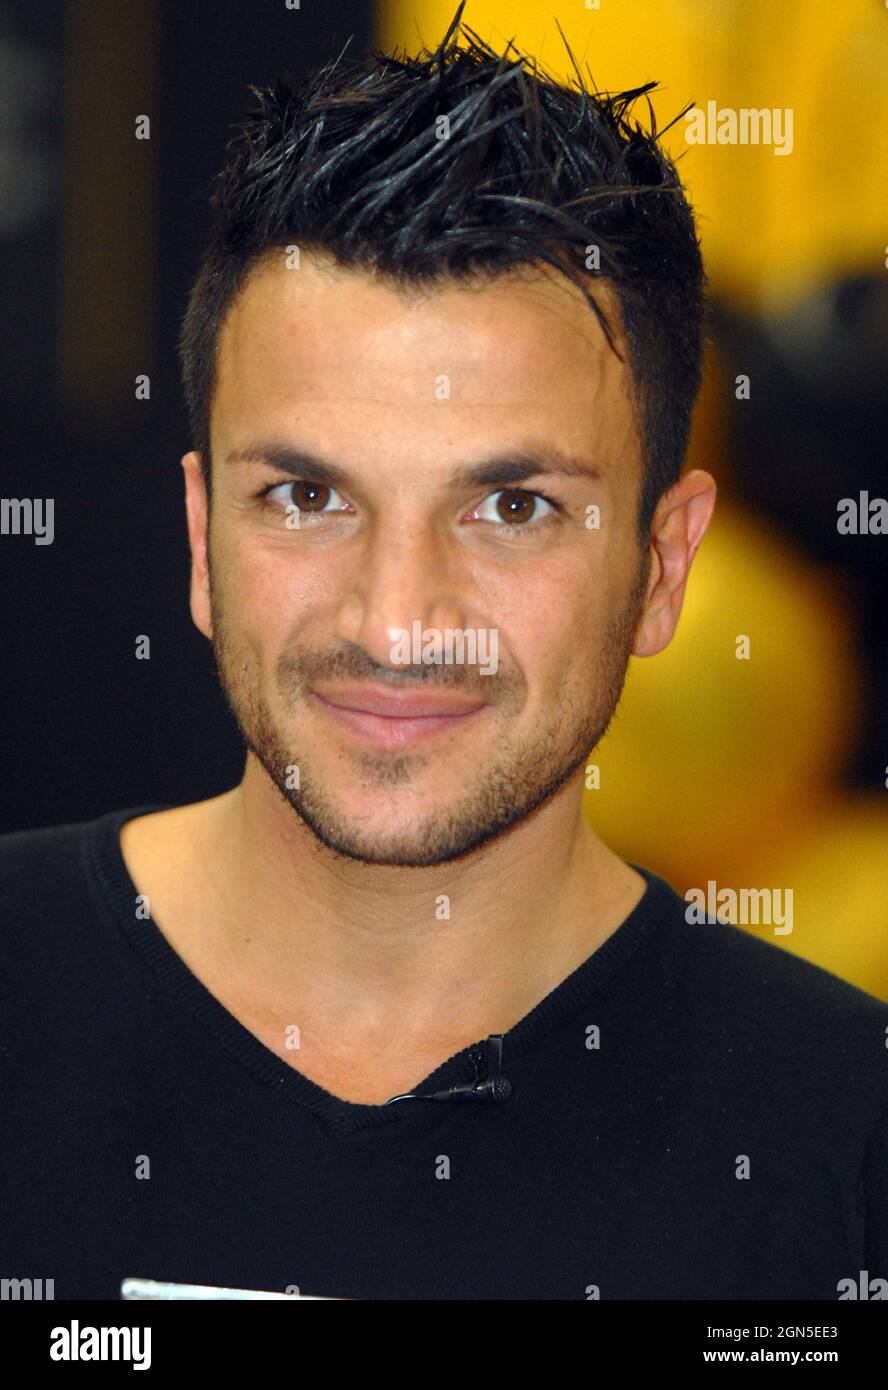 POP SINGER,PETER ANDRE, AT ASDA SUPERMARKET, HAVANT, HANTS WHERE THOUSANDS TURNED OUT TO SEE HIM SIGN COPIES OF HIS NEW RECORD. JORDAN,   PIC MIKE WALKER,2009 Stock Photo